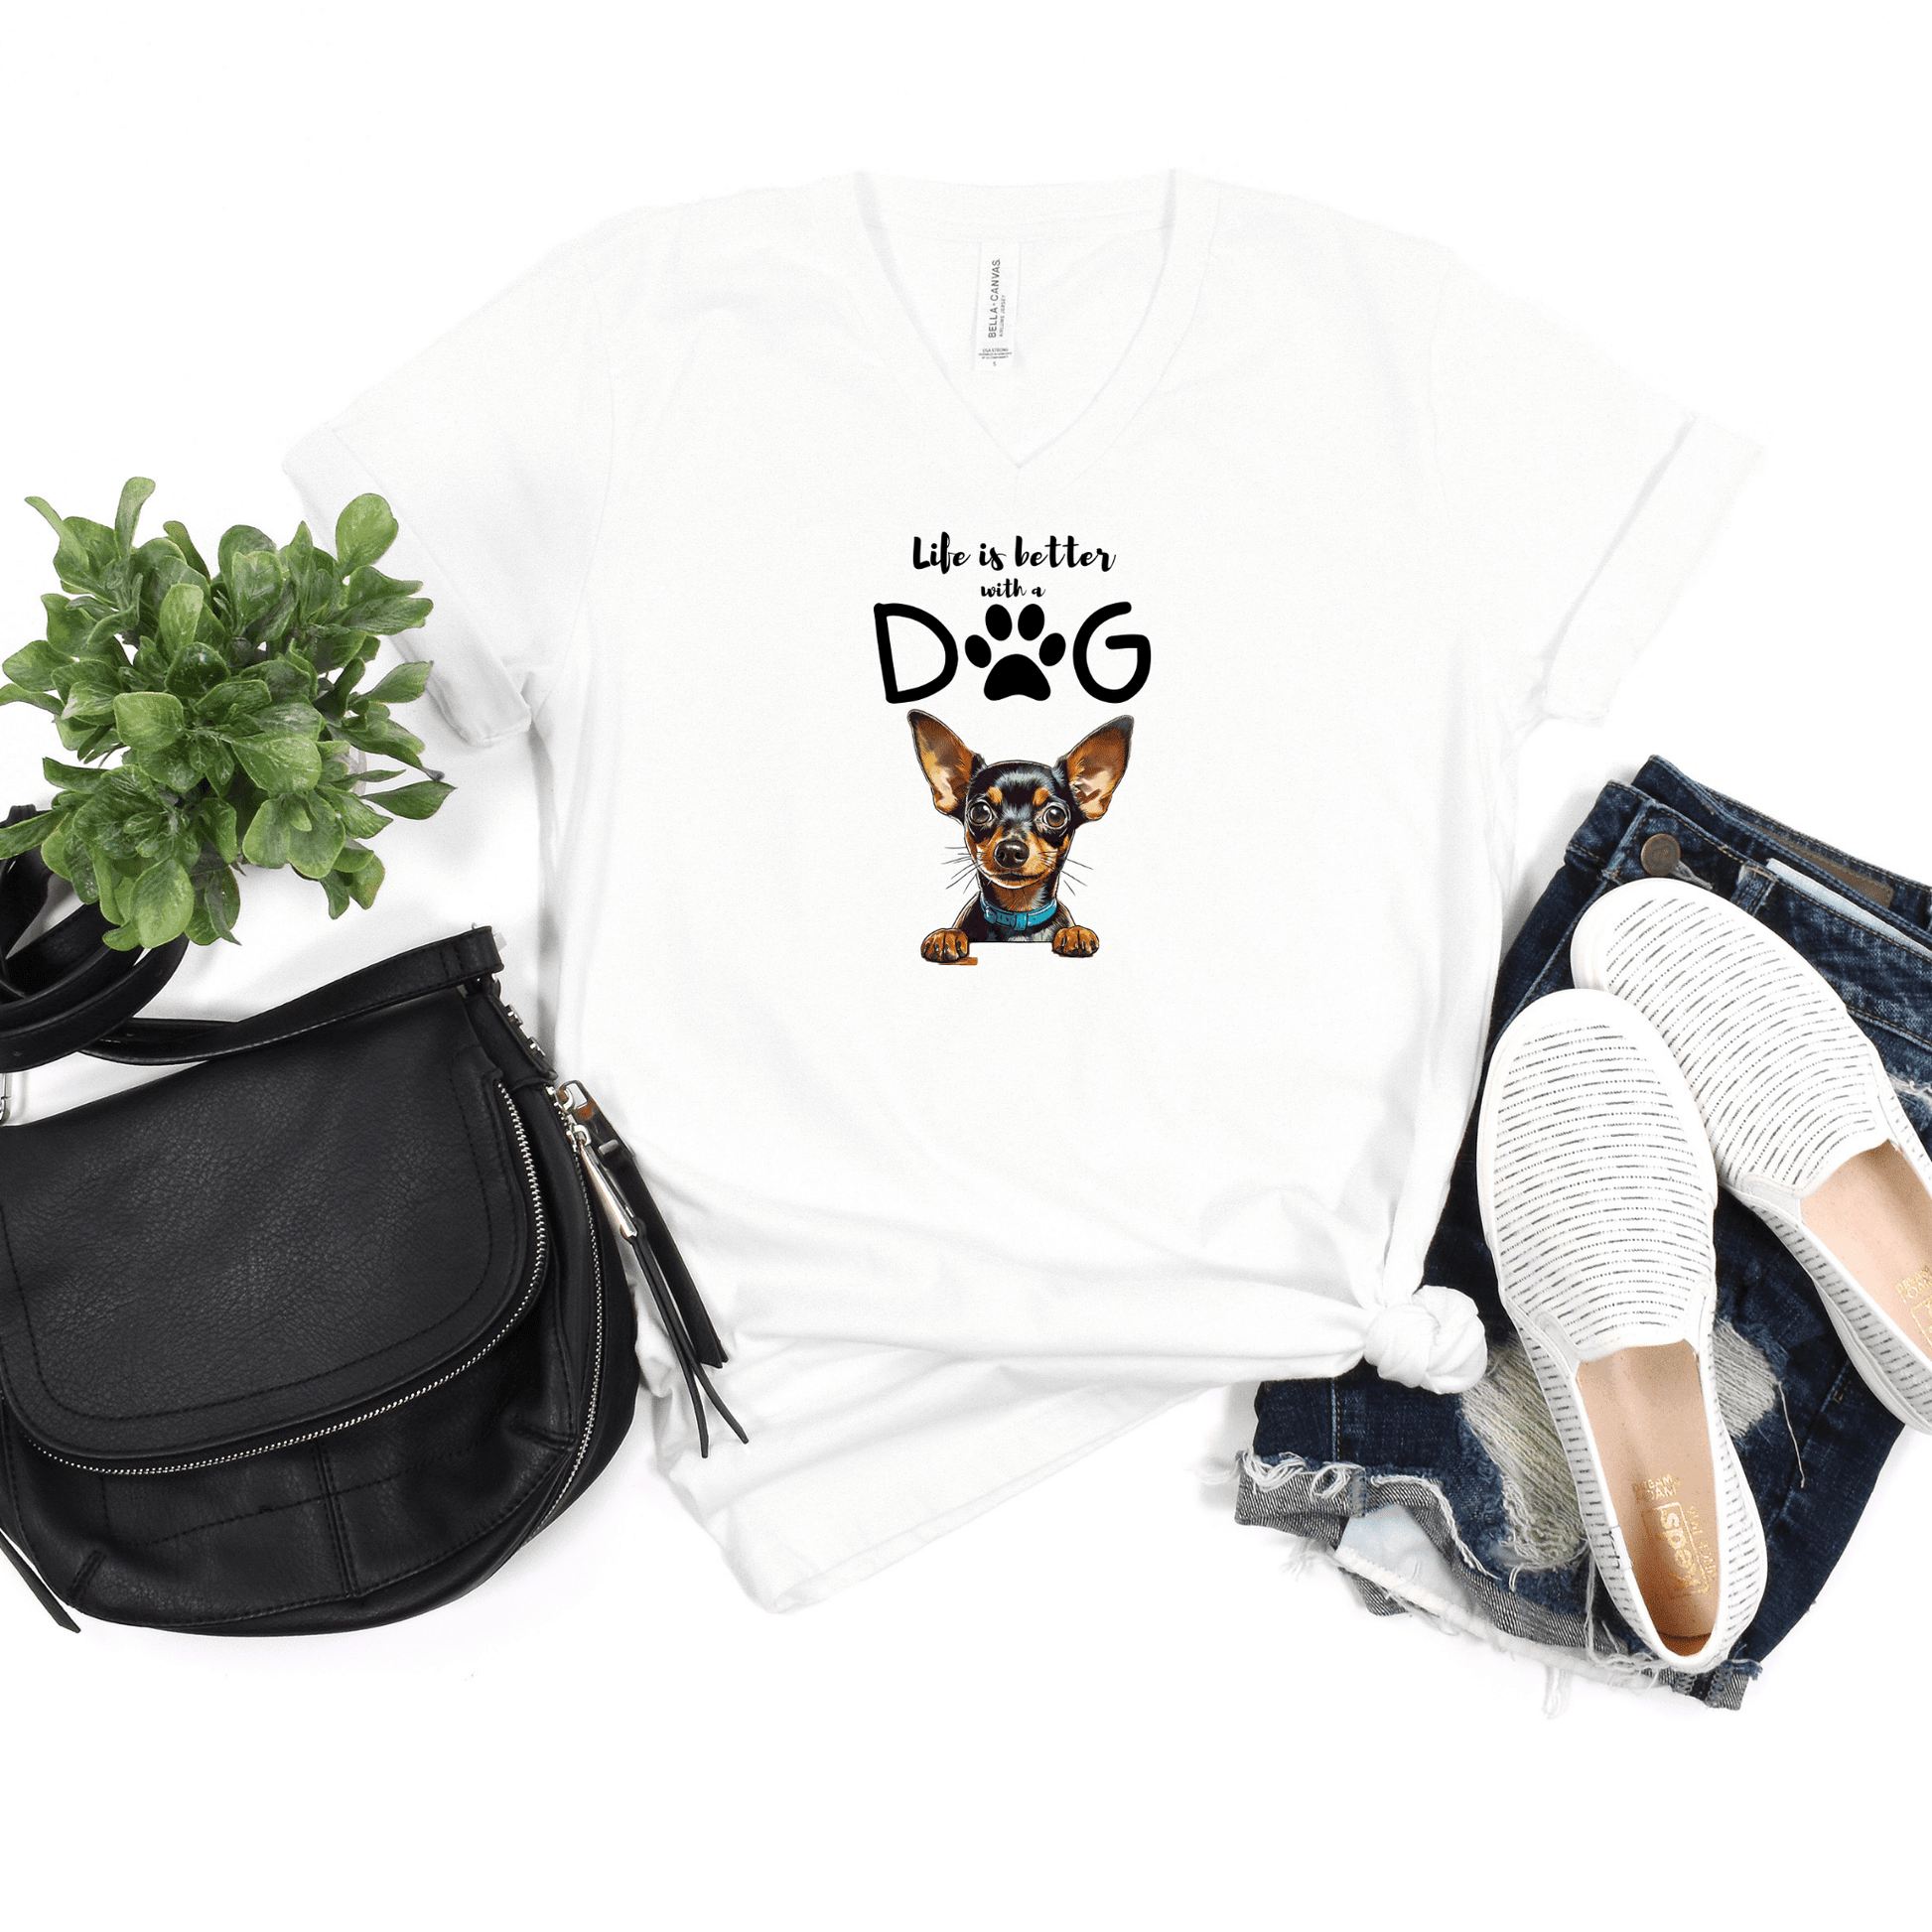 Life is Better with a Dog - Mini Pinscher - Soulshinecreators